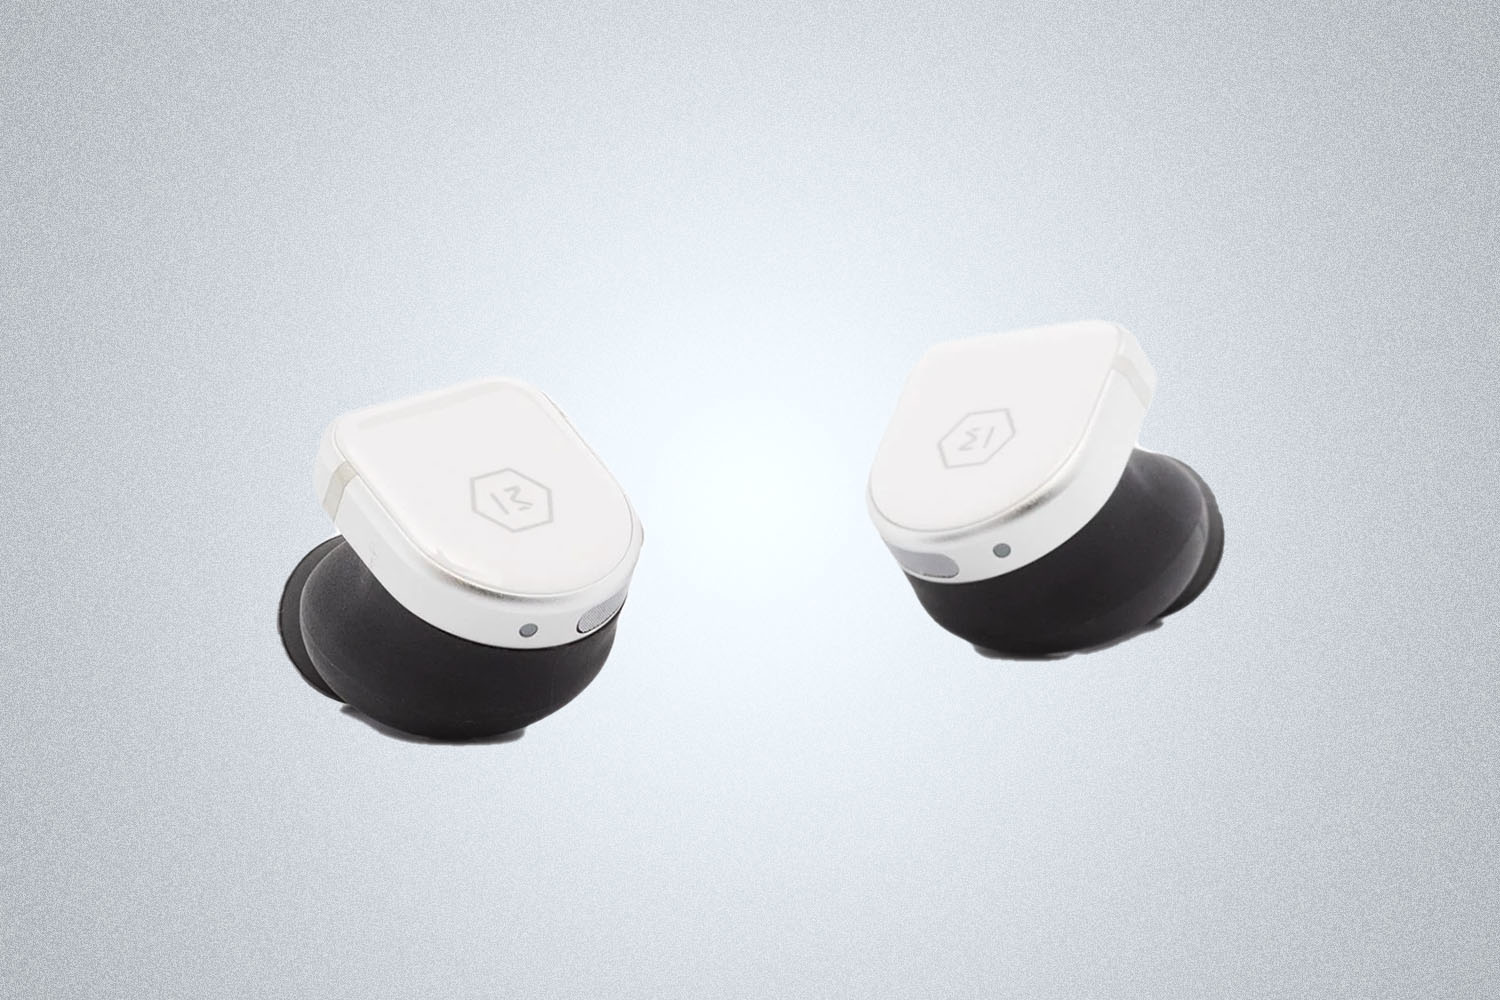 a pair of wireless earbuds